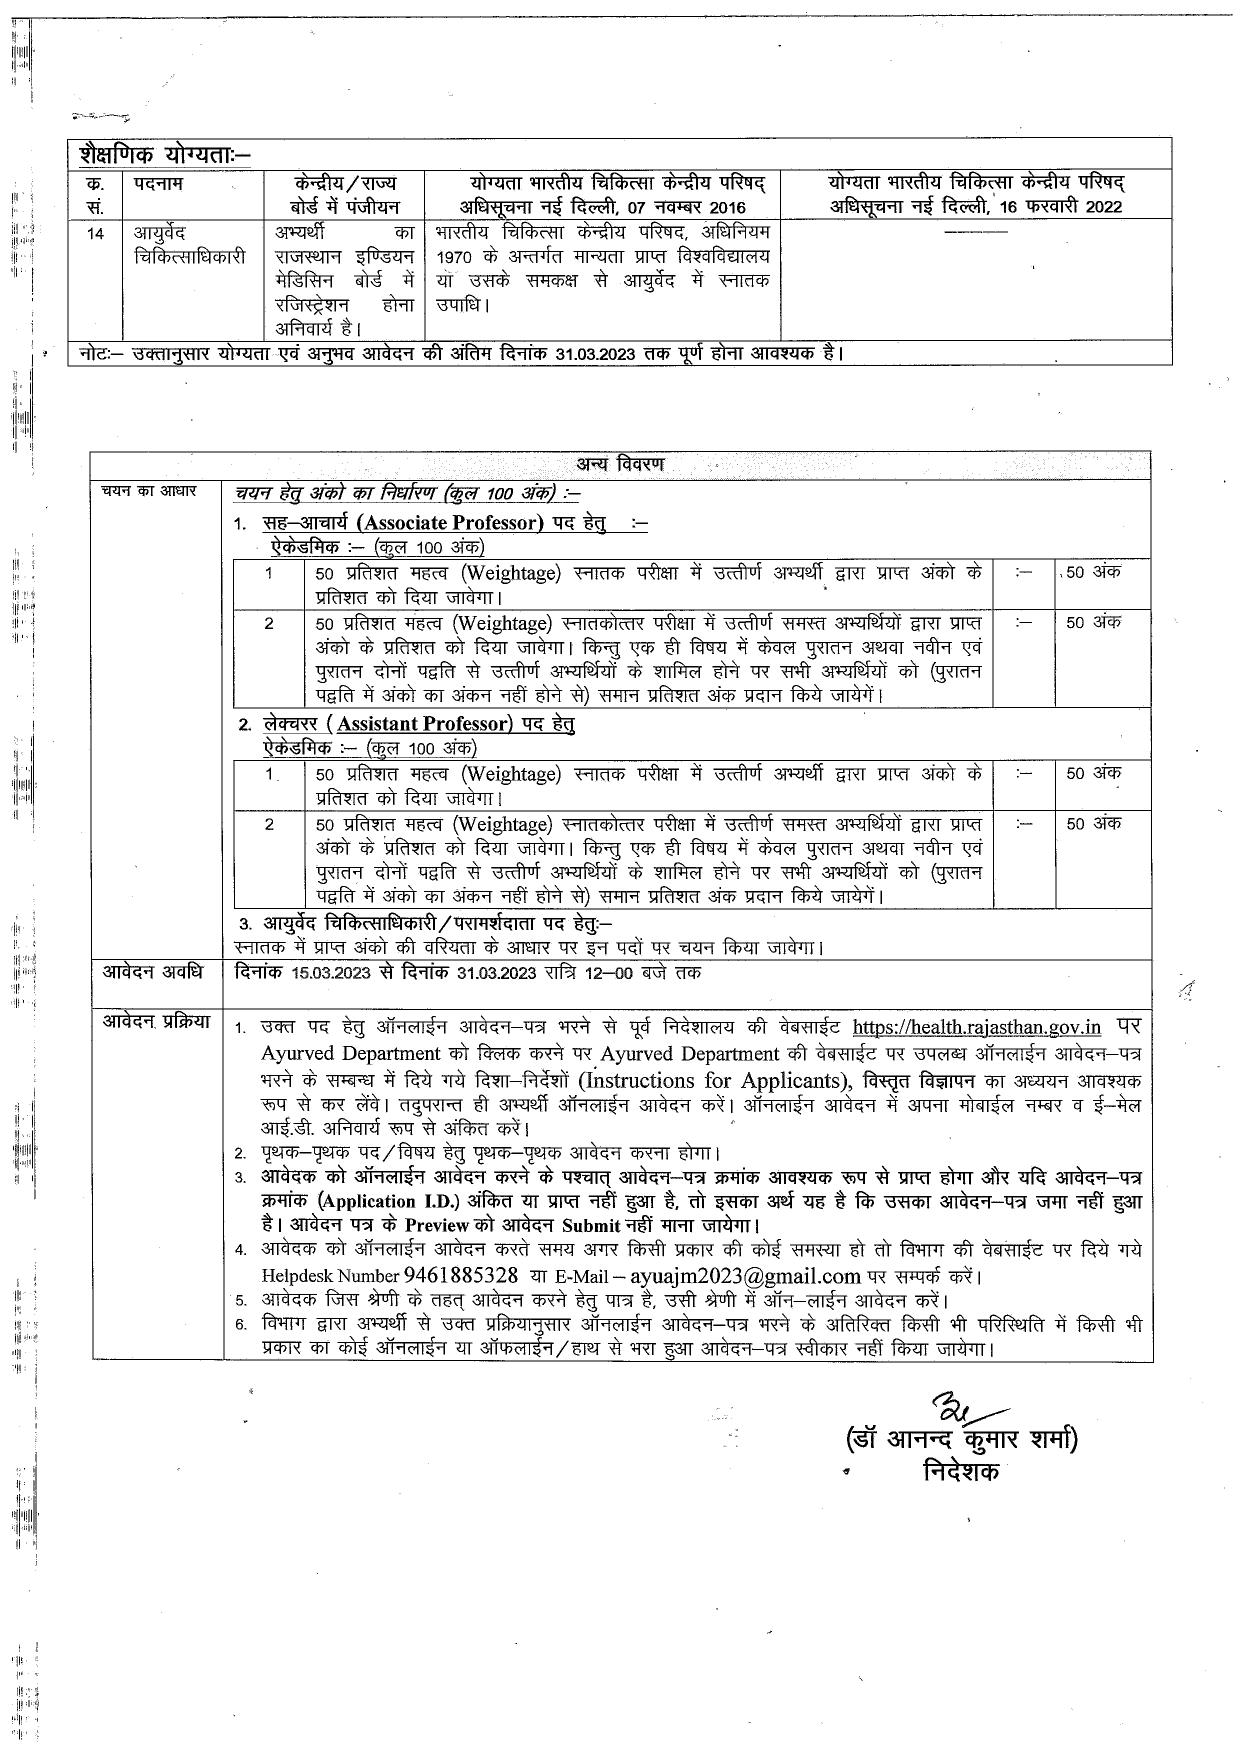 Ayurveda Department Rajasthan Lecturer, Assistant Teacher and Various Posts Recruitment 2023 - Page 13